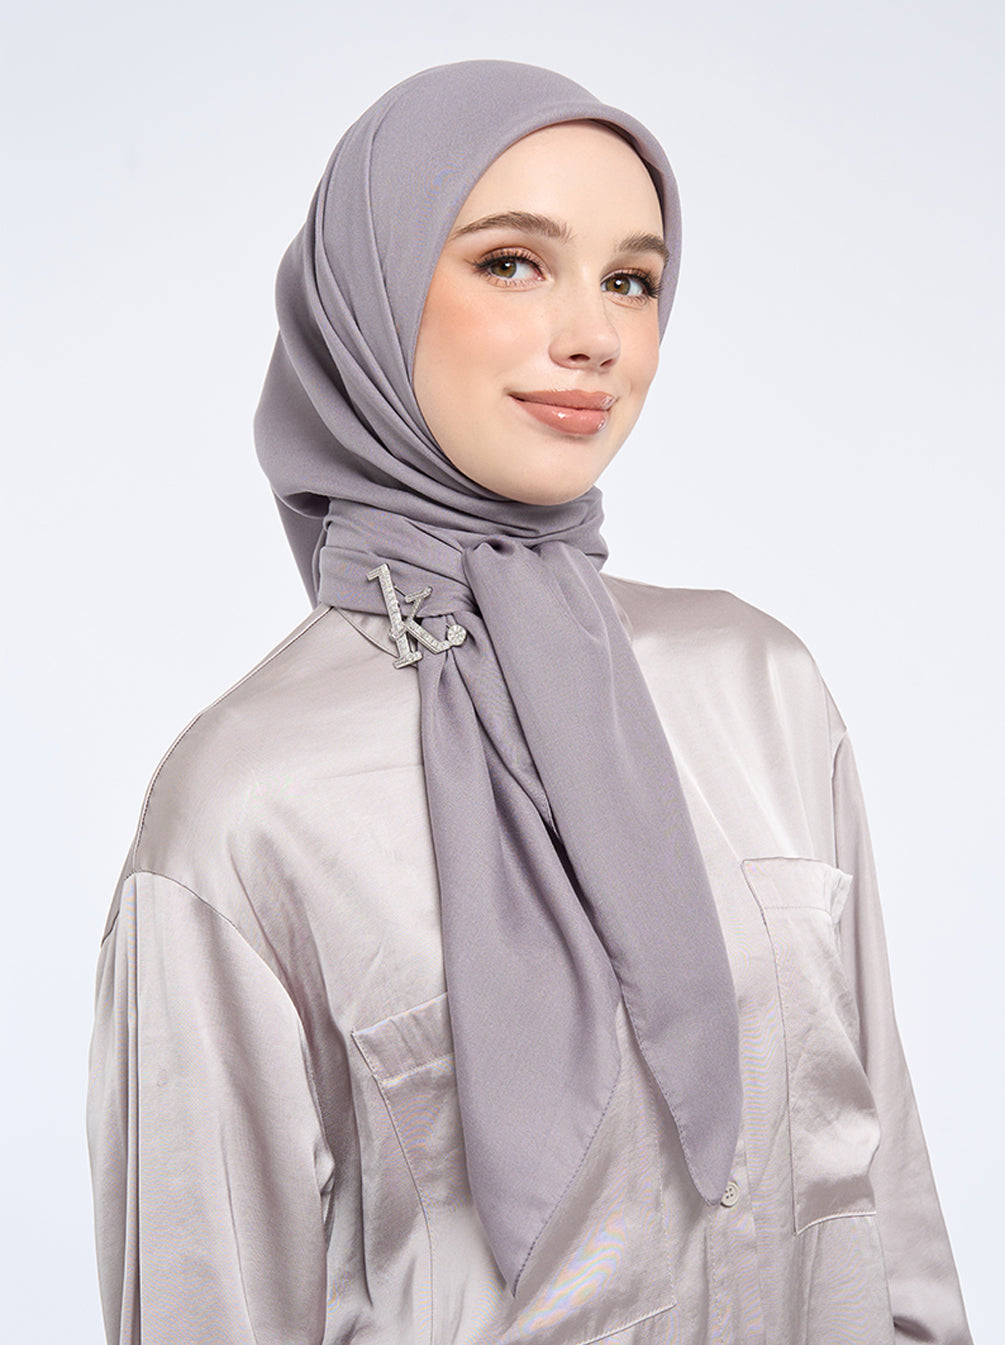 AIRY VOILE SCARF PLAIN STONE GRAY